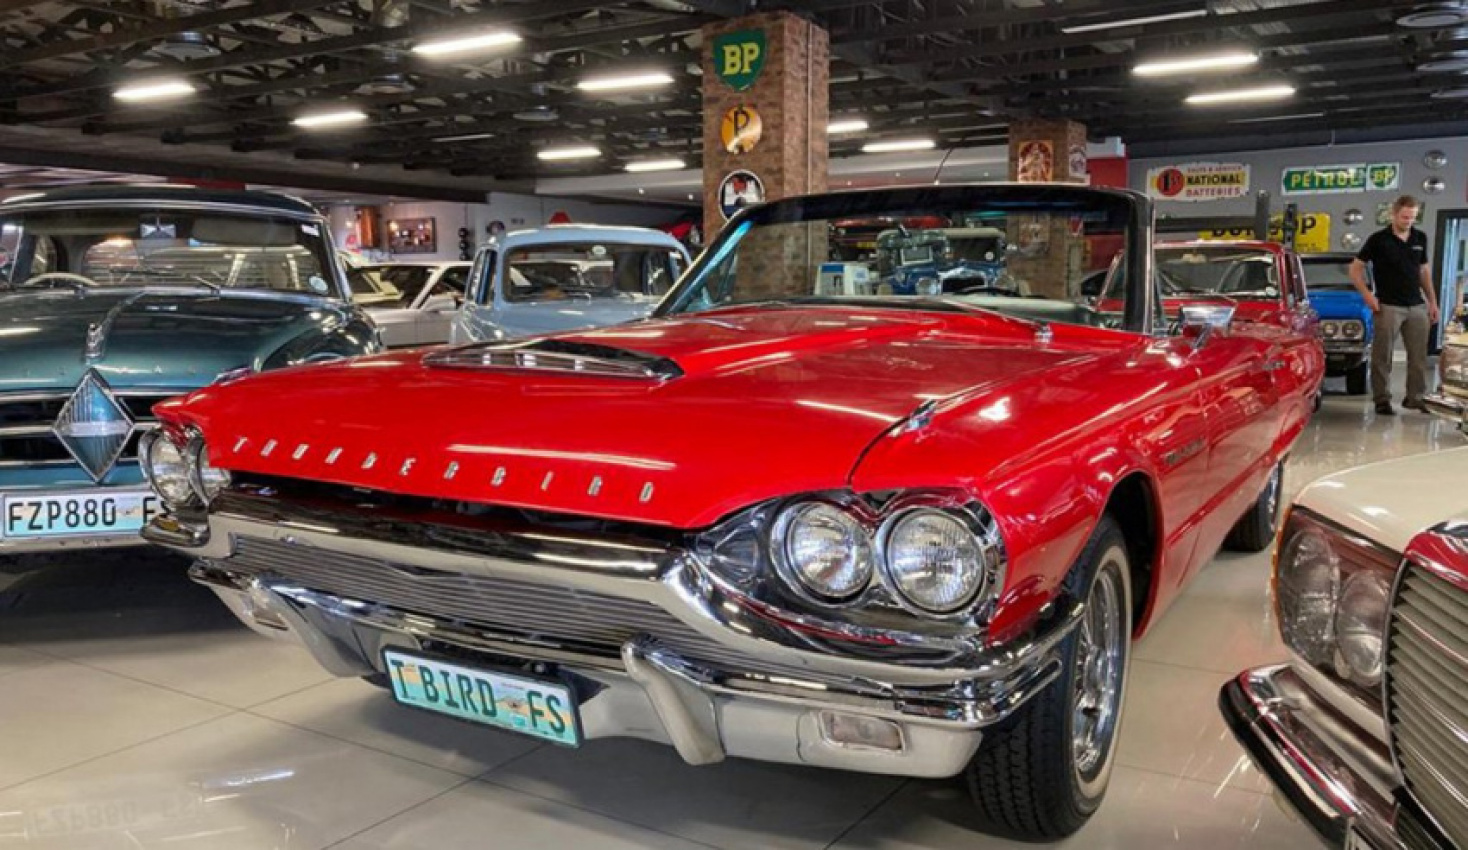 autos, cars, news, classic cars, creative rides, high street auctions, louis coetzer, massive classic car auction in johannesburg – photos of what’s on offer